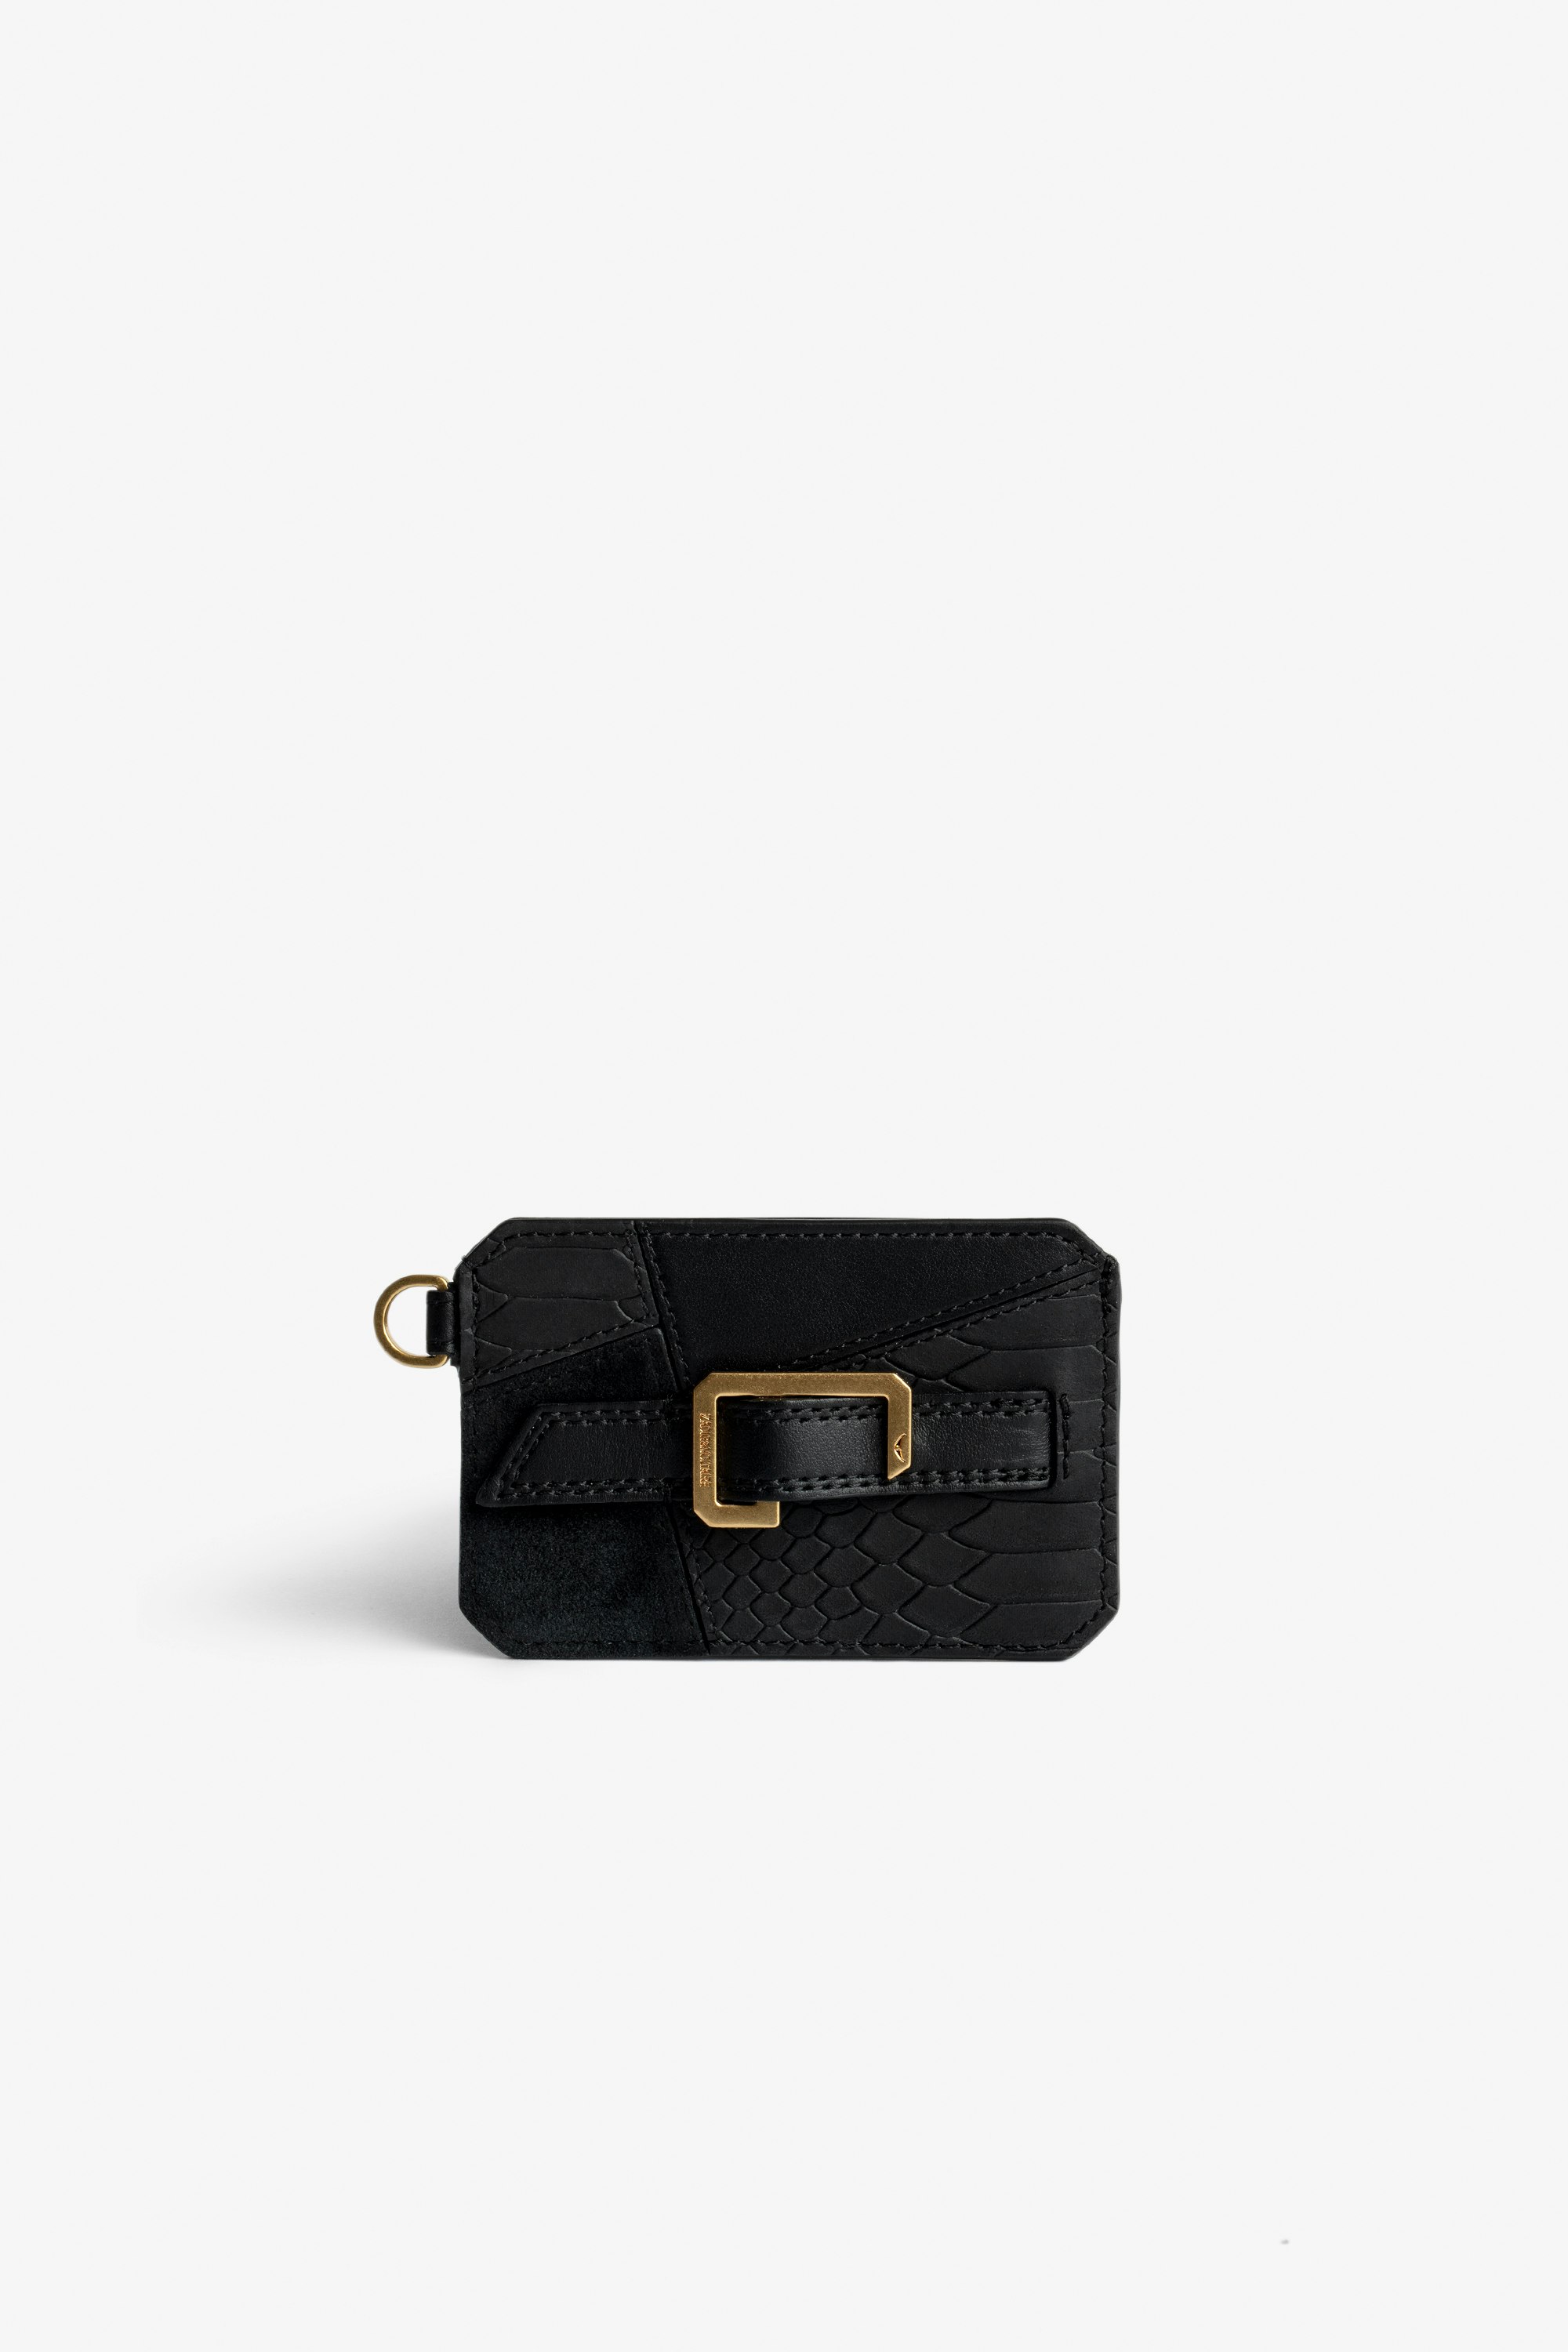 Le Cecilia Savage Pass Card Case - Women's card case in black leather patchwork with a C-shaped gold-tone buckle